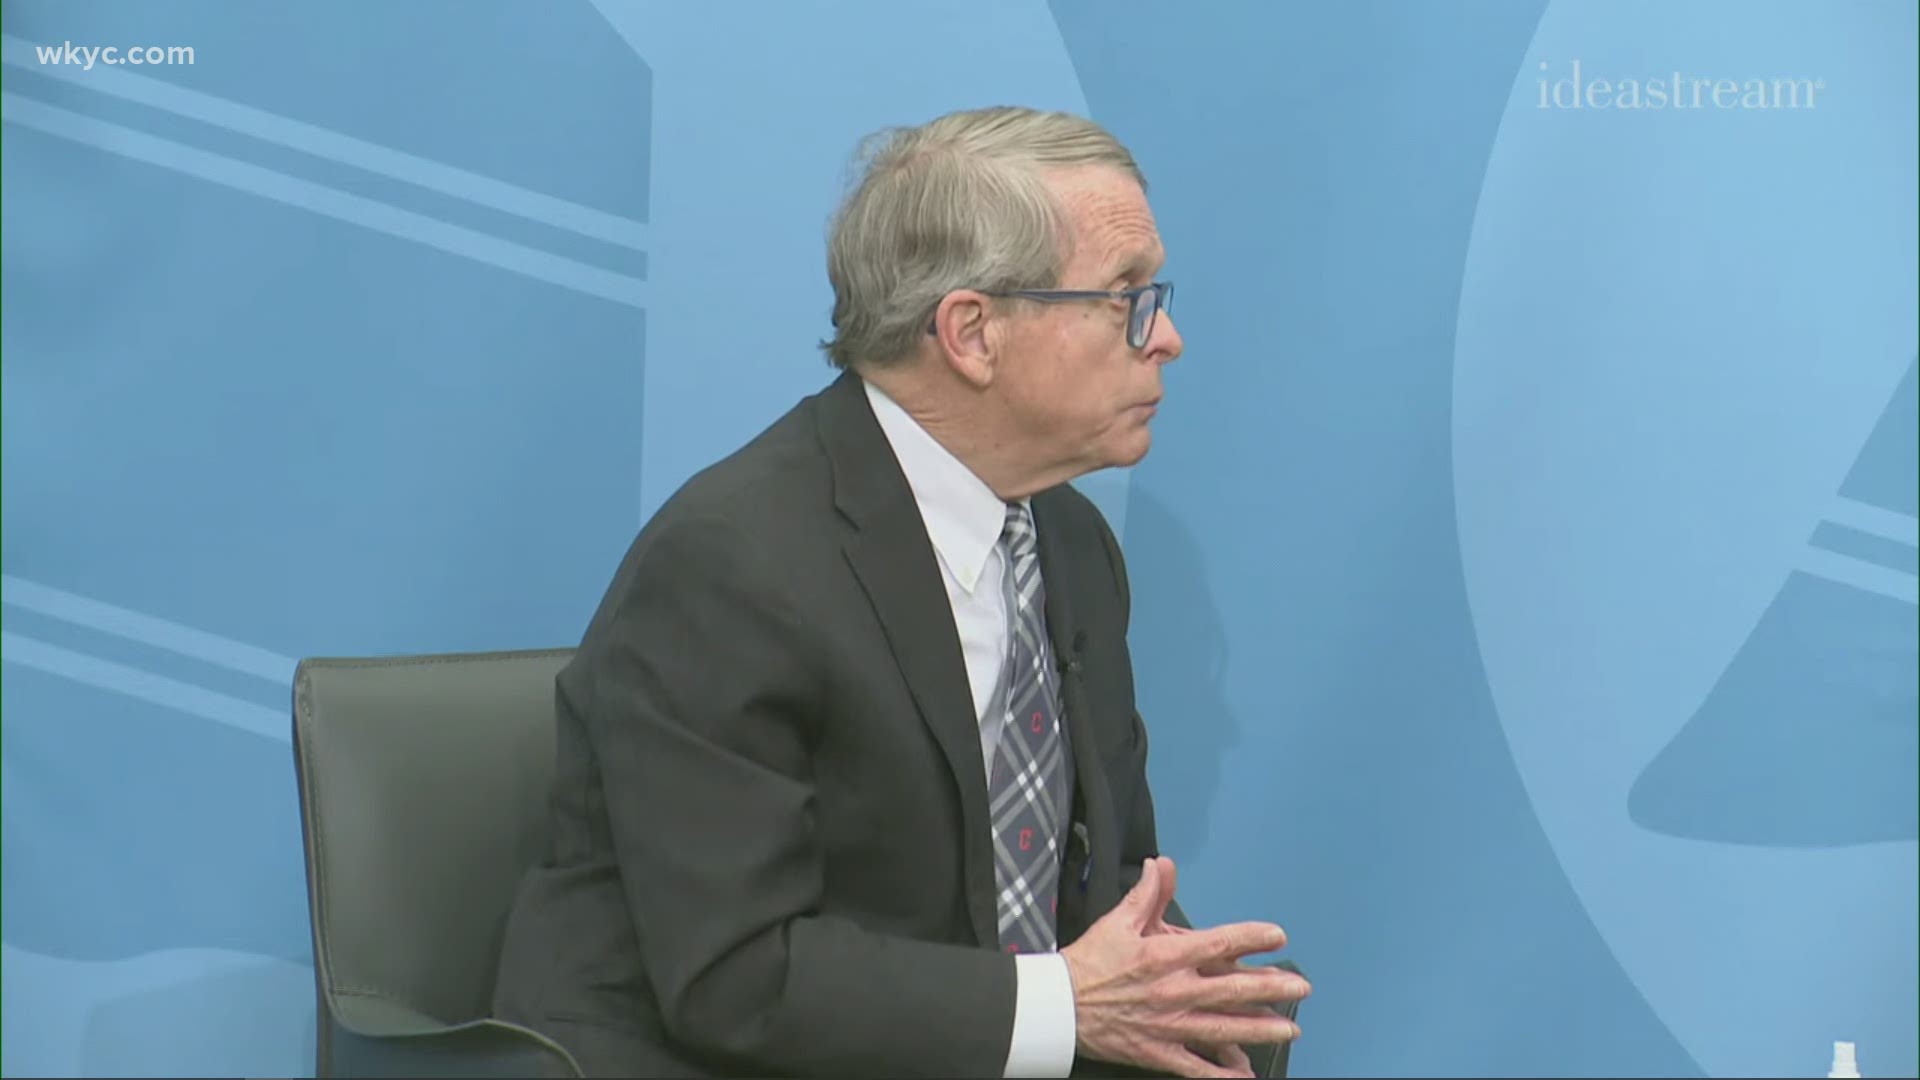 Ohio Governor Mike DeWine said summer school should be considered for students who have fallen behind during the COVID-19 pandemic.